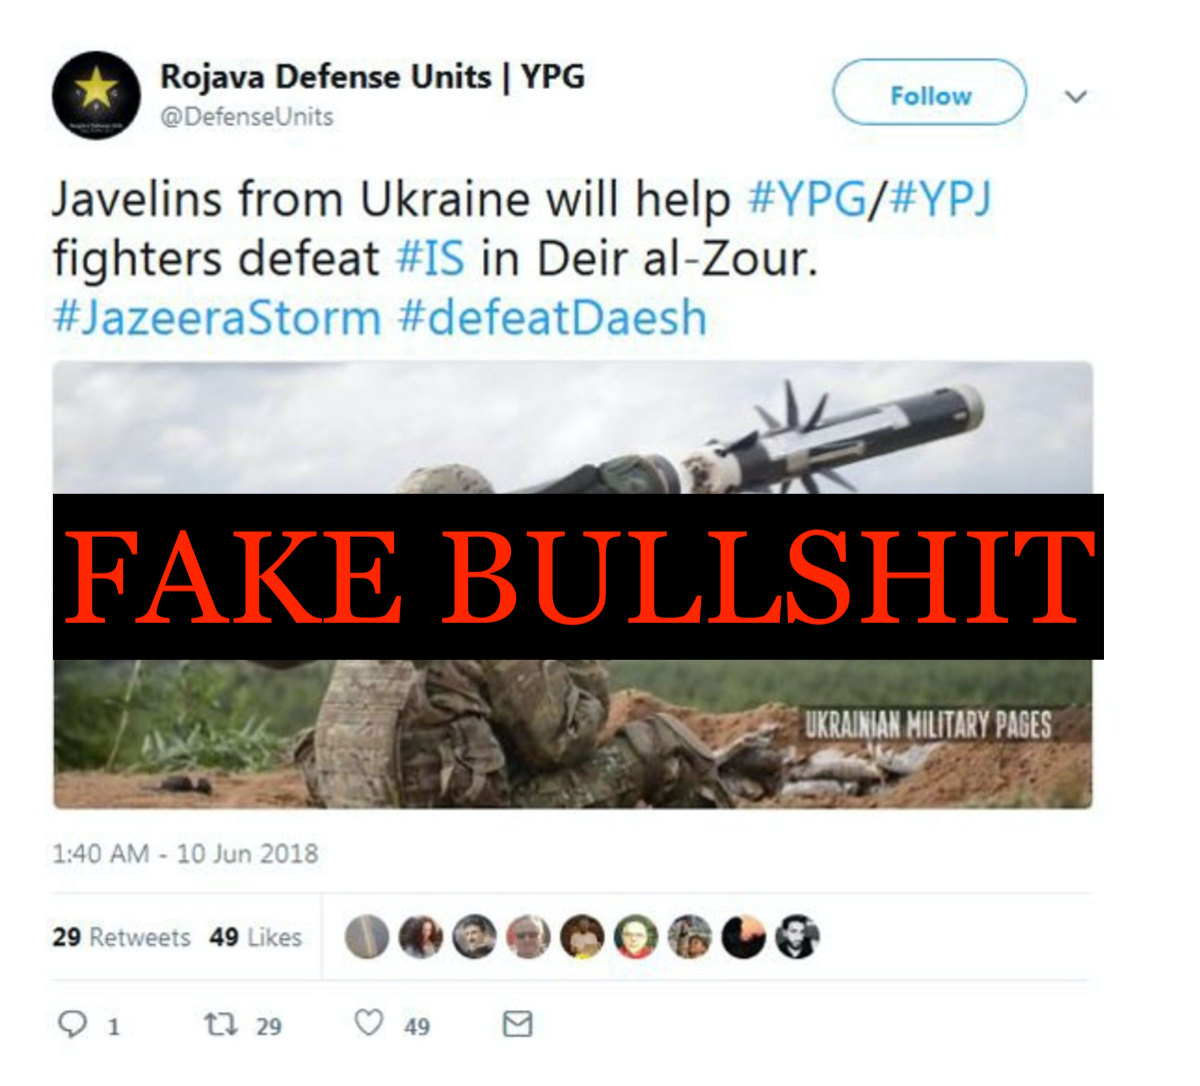 They also tried to enrage Turkish audiences with a forged screenshot of a fake tweet from the U.S.-backed Kurdish forces in Syria claiming they'd received US Javelin anti-tank missiles from Ukraine. Never happened. (label mine here)